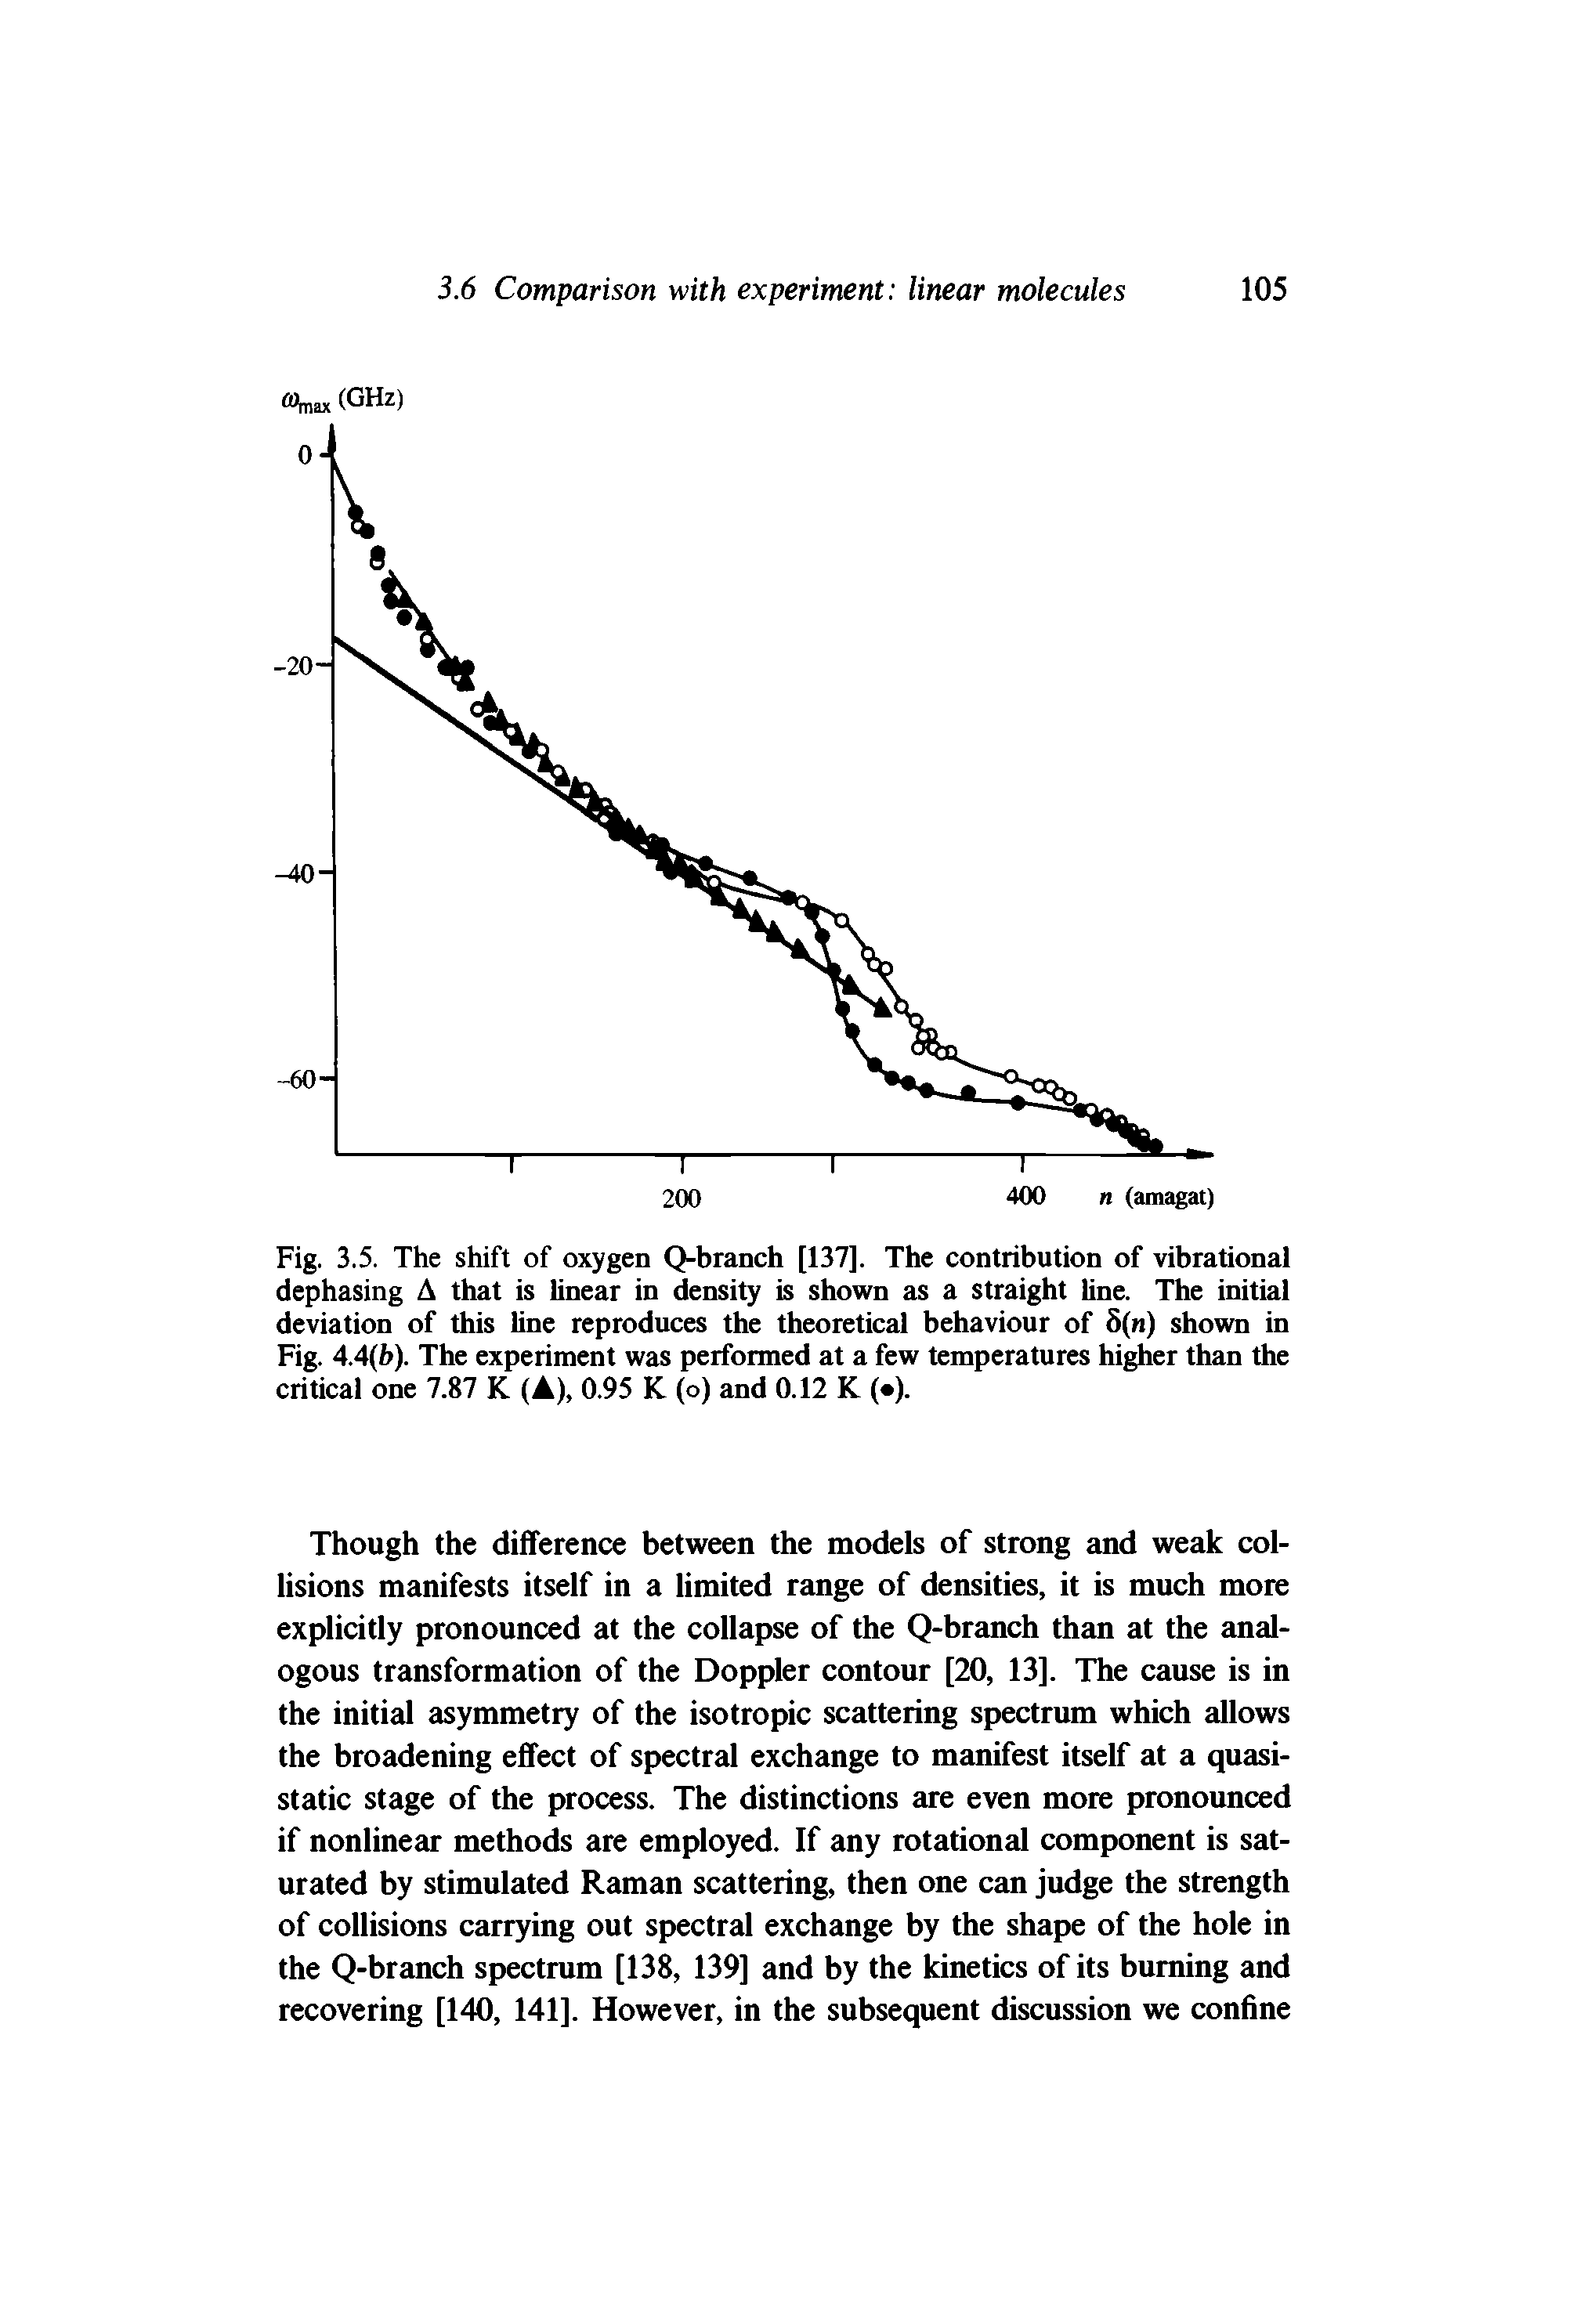 Fig. 3.5. The shift of oxygen Q-branch [137]. The contribution of vibrational dephasing A that is linear in density is shown as a straight line. The initial deviation of this line reproduces the theoretical behaviour of 5(n) shown in Fig. 4.4(b). The experiment was performed at a few temperatures higher than the critical one 7.87 K (A), 0.95 K (o) and 0.12 K ( ).